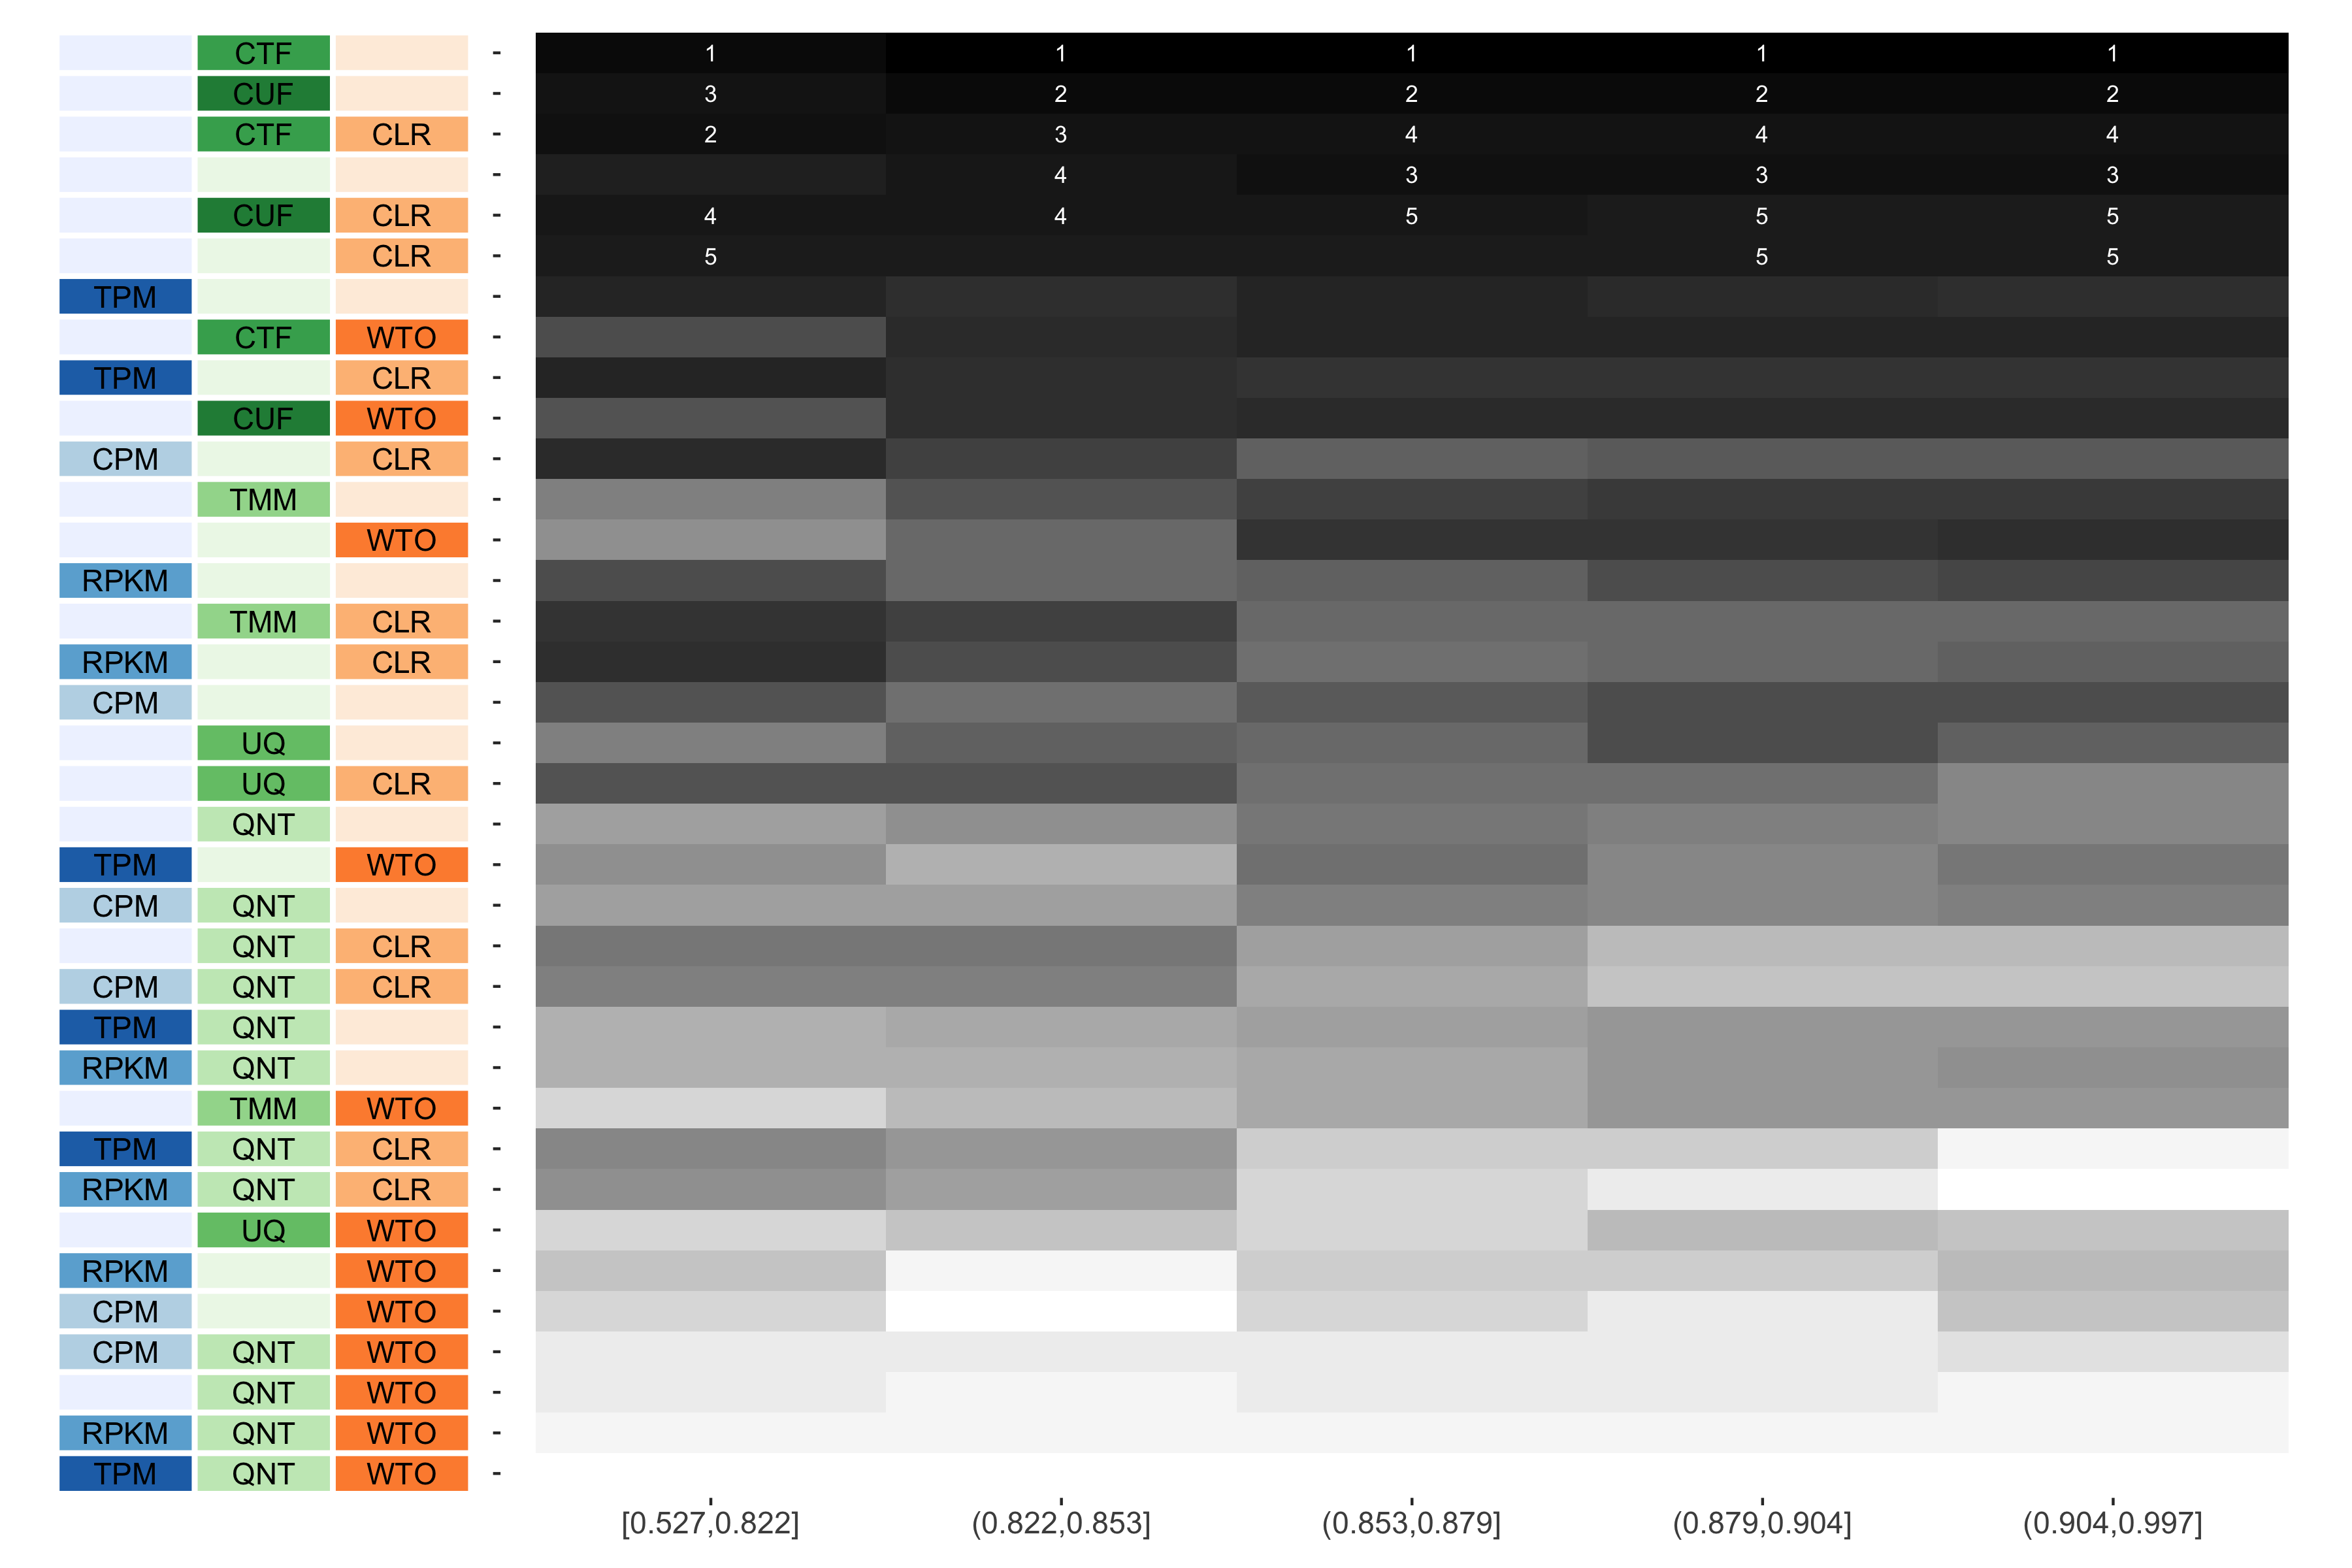 The heatmap shows the number of times (cell color) each workflow (row) outperforms other workflows as sample similarity varies (columns), when the resulting coexpression networks are evaluated based on the tissue-naive gold standard. The darkest colors indicate workflows that are significantly better than the most other workflows. In addition, the top 5 workflows in each column are marked with their rank, with ties given minimum rank.